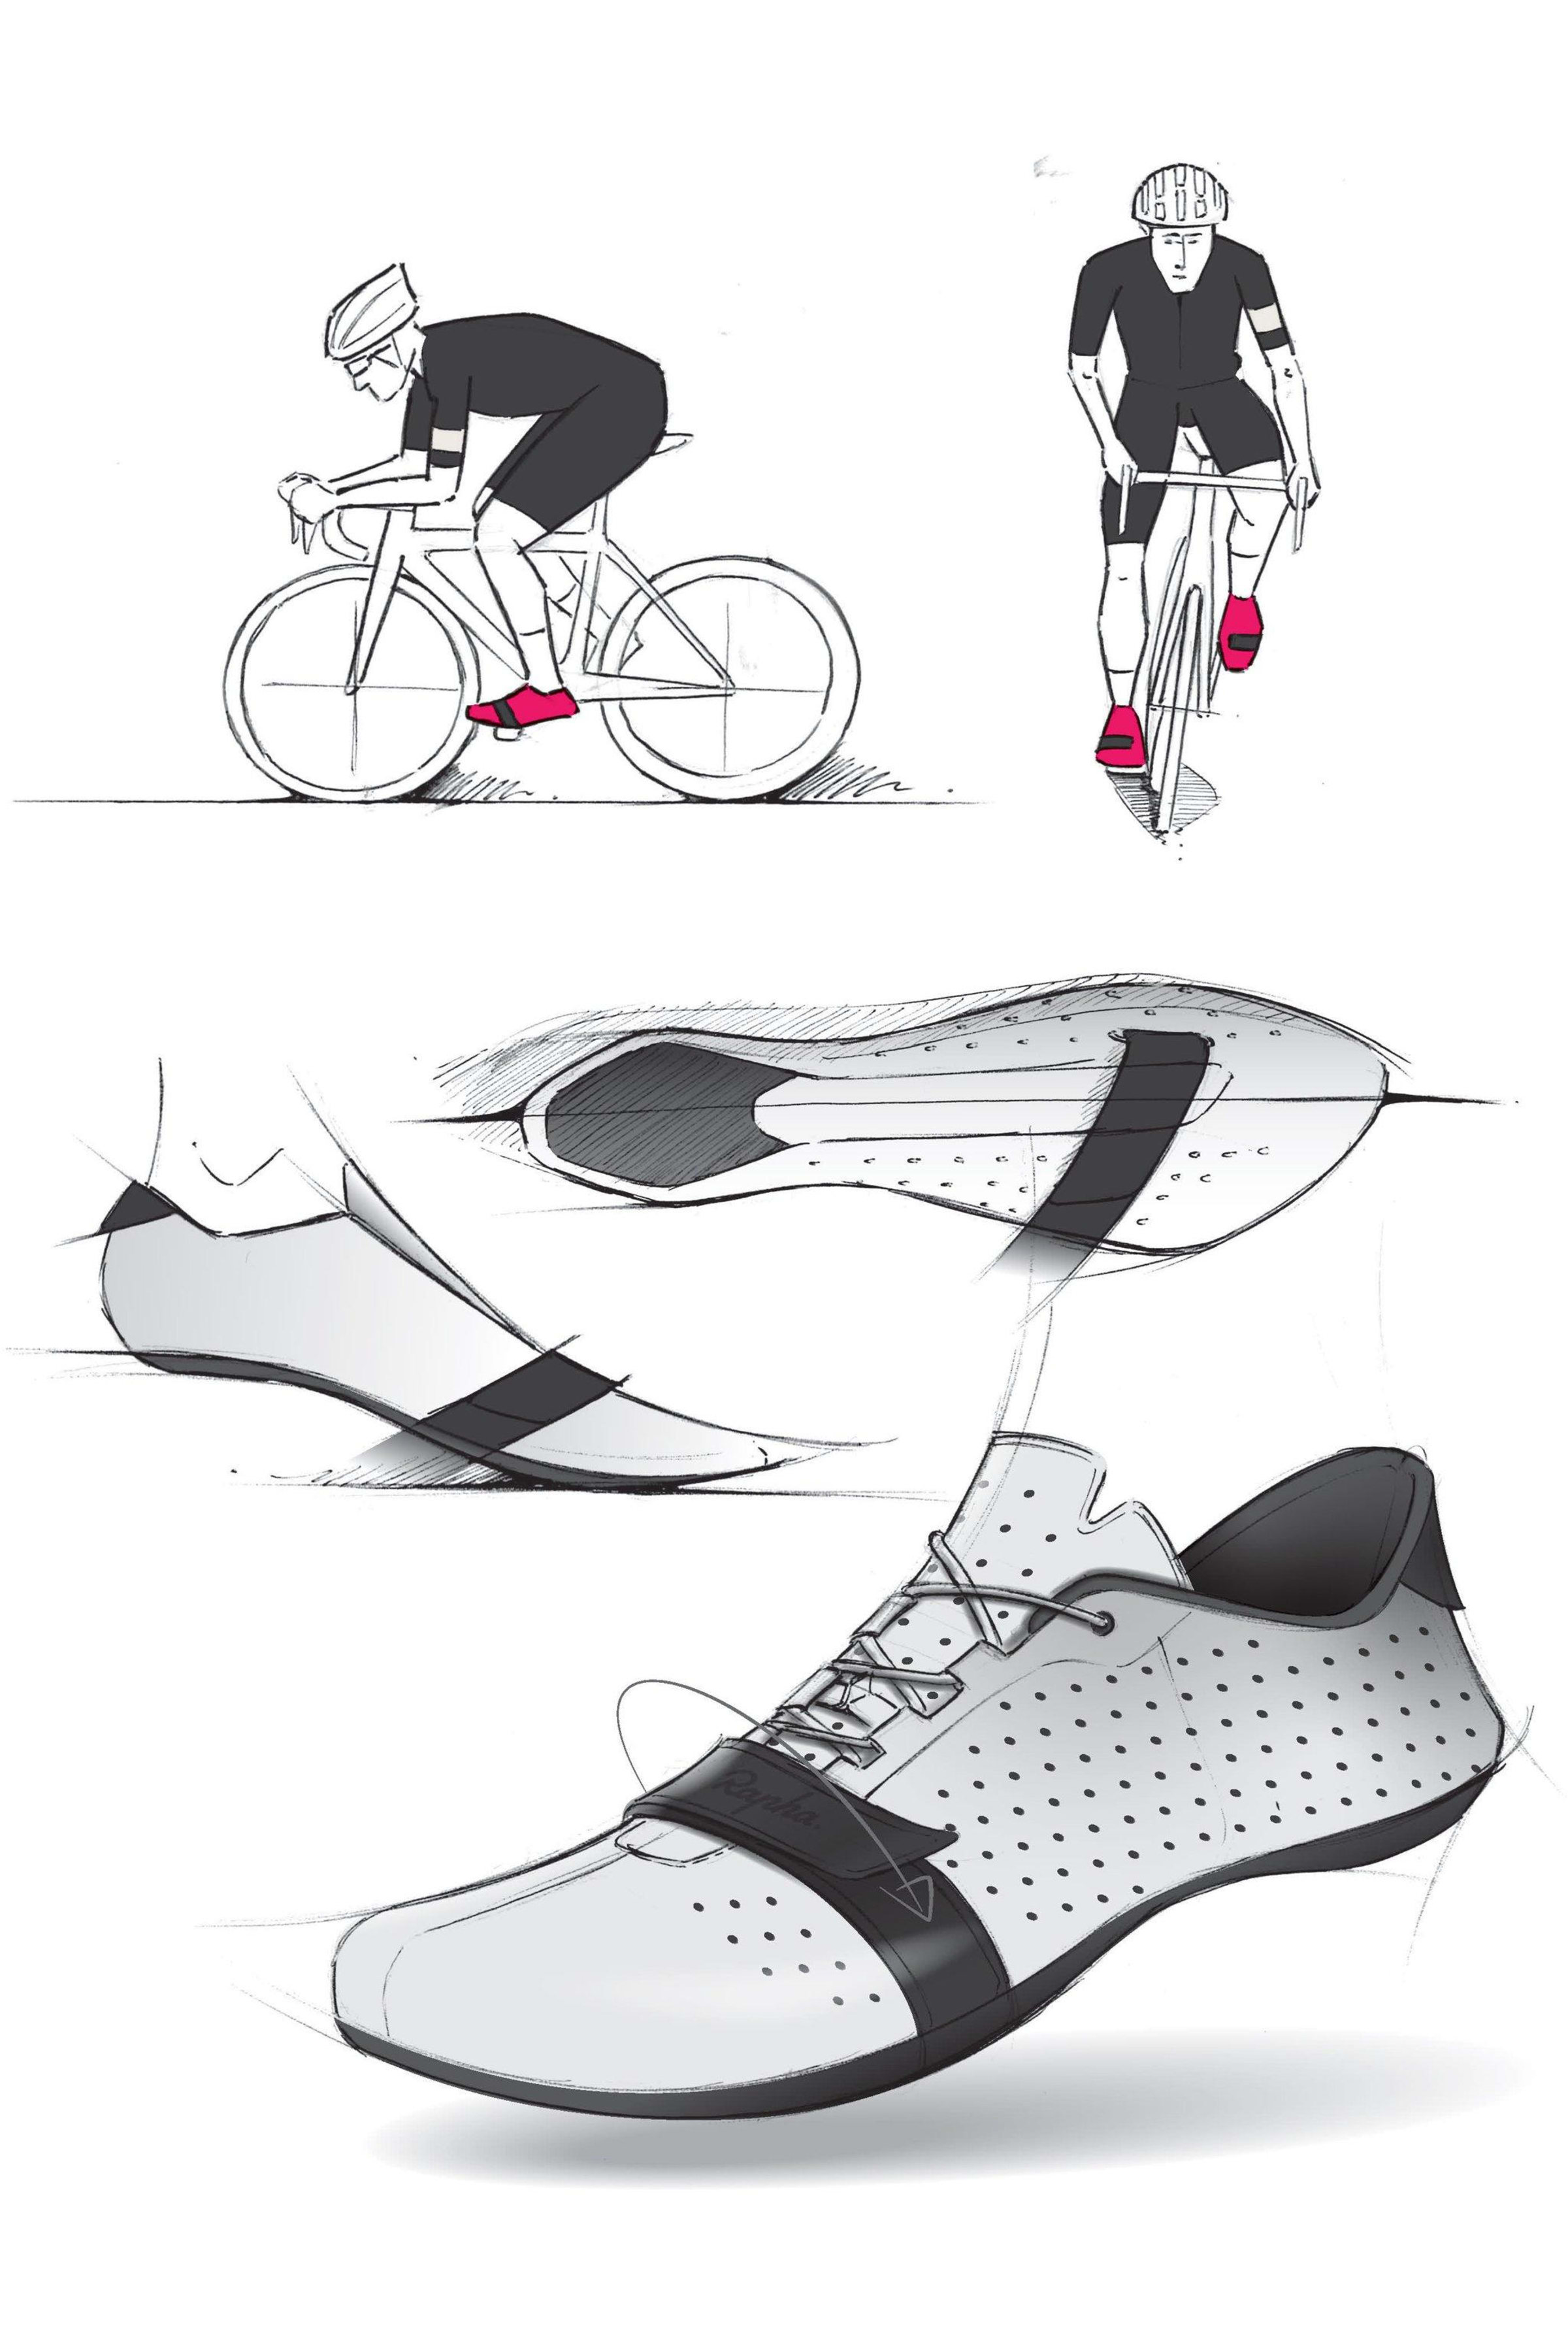 Rapha Classic Cycling Shoes